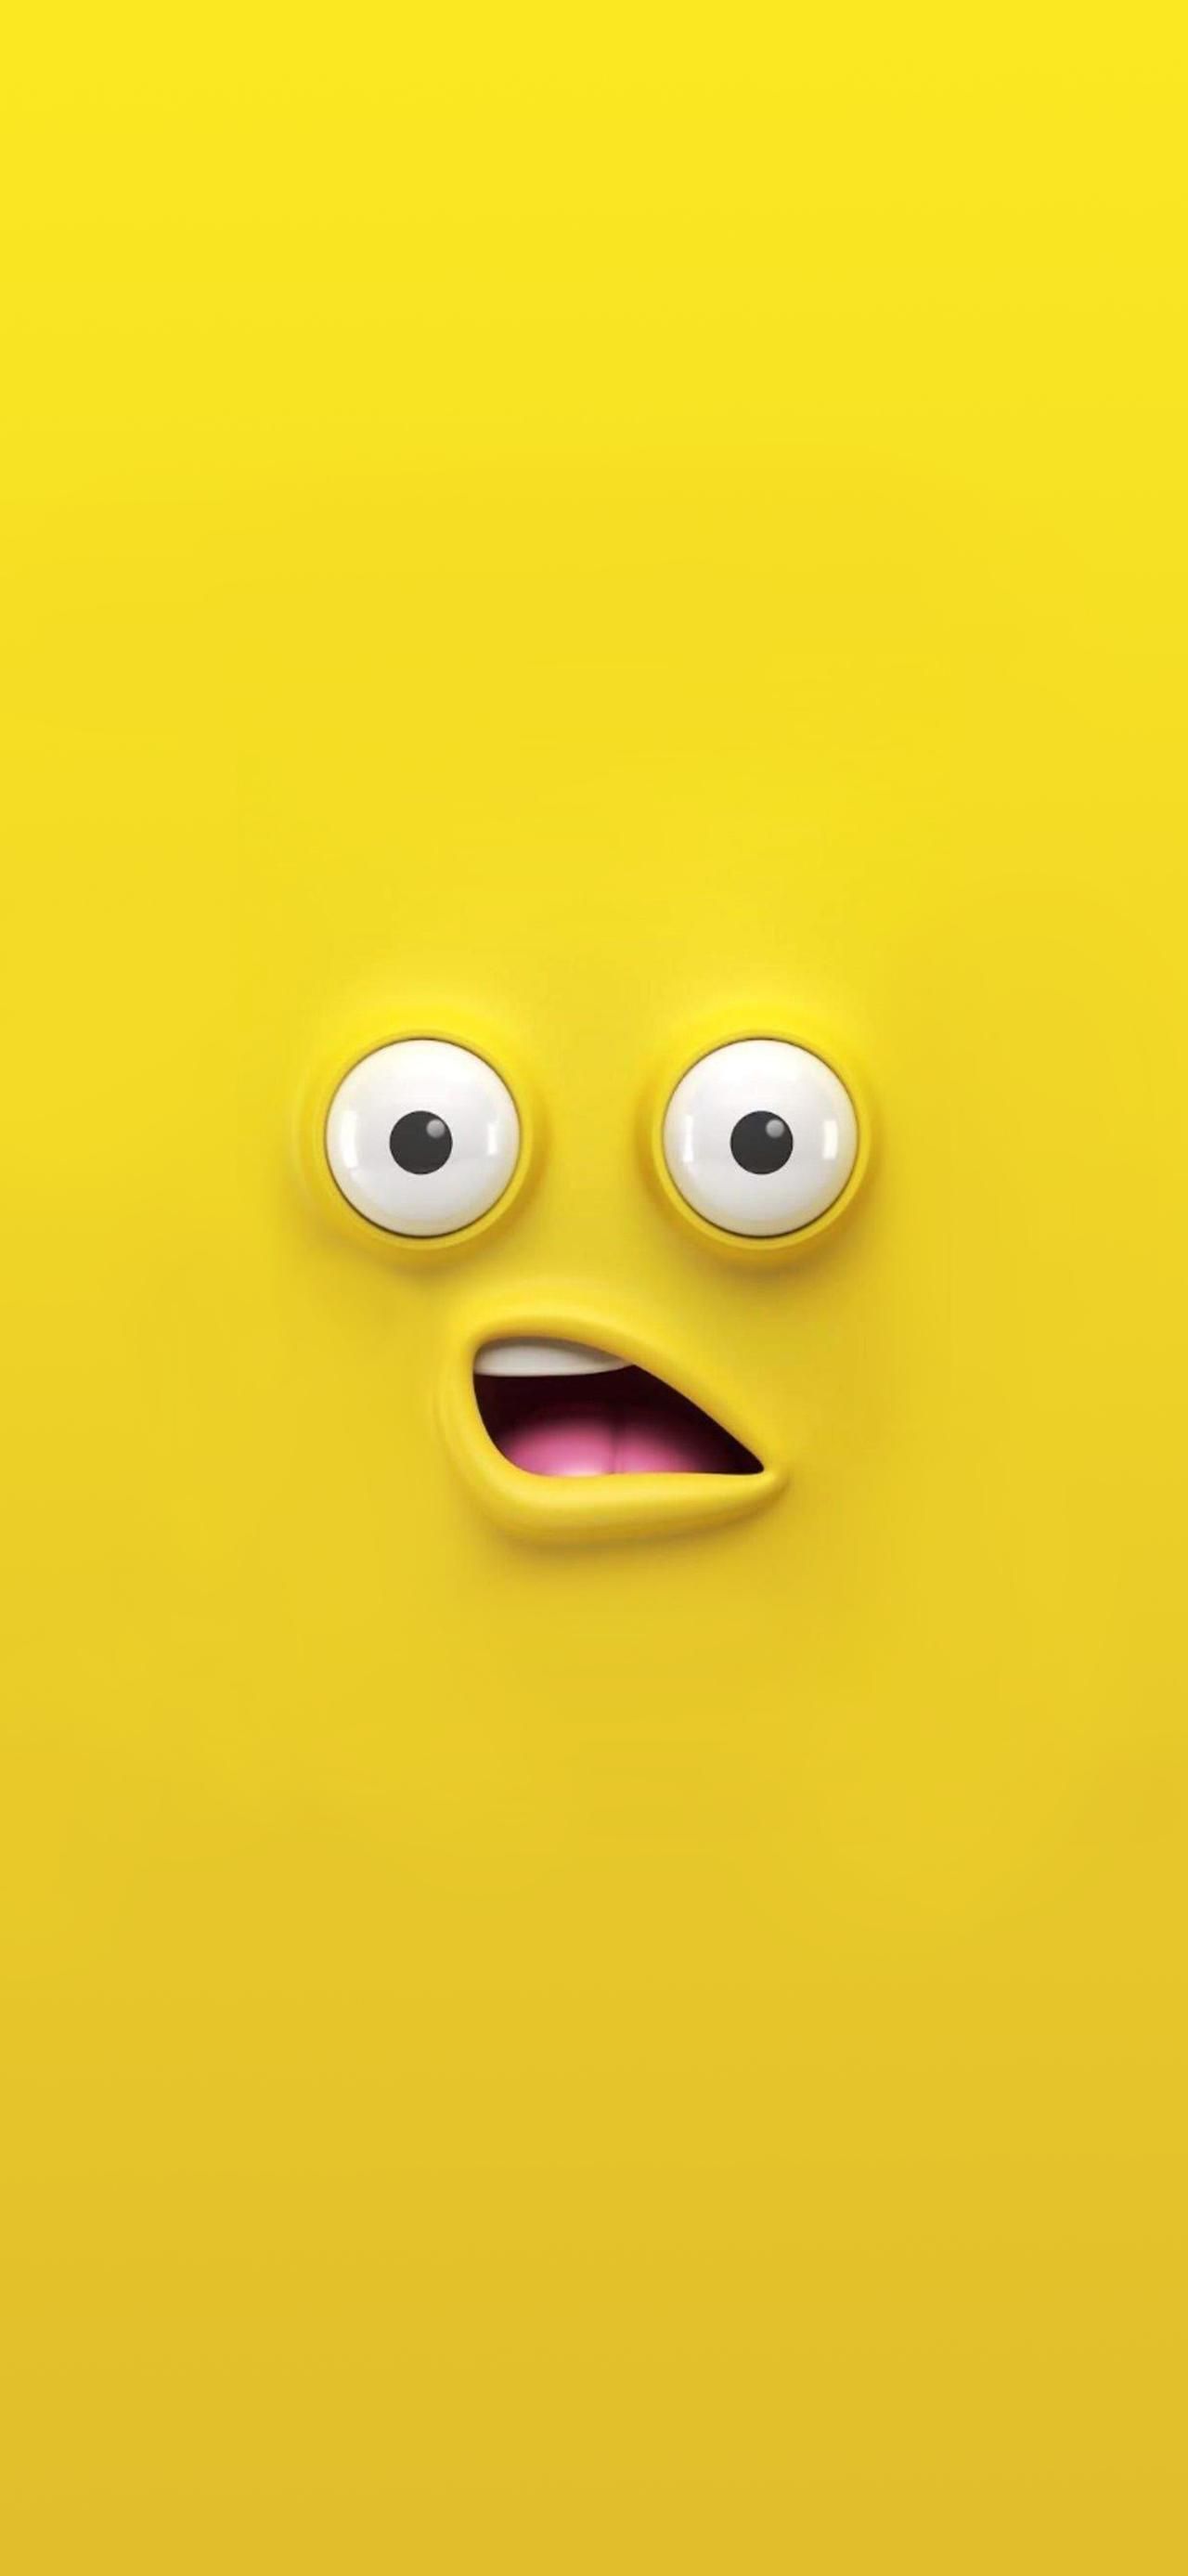 Yellow Face Wallpaper. Funny iphone wallpaper, iPhone wallpaper yellow, Cartoon wallpaper iphone